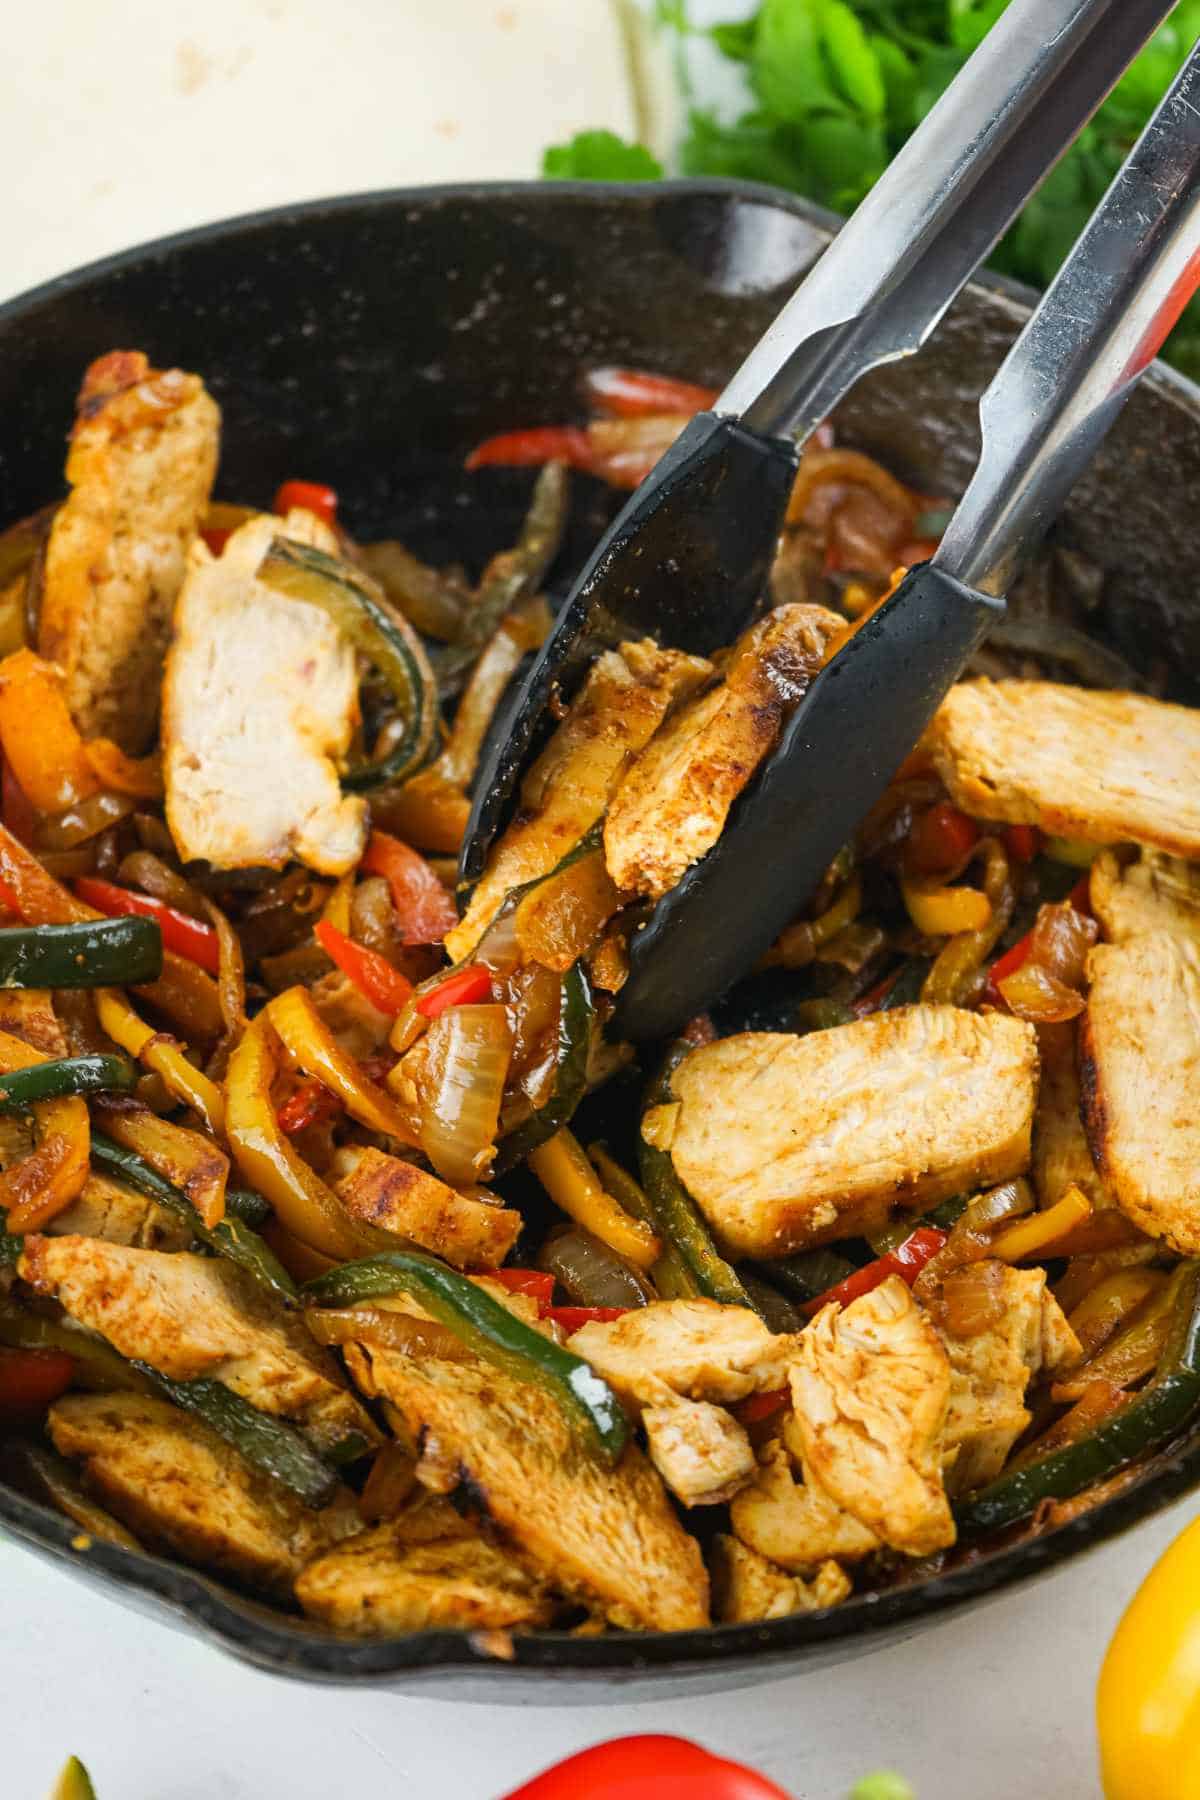 chicken fajitas in cast iron skillet with tongs scooping up portion.